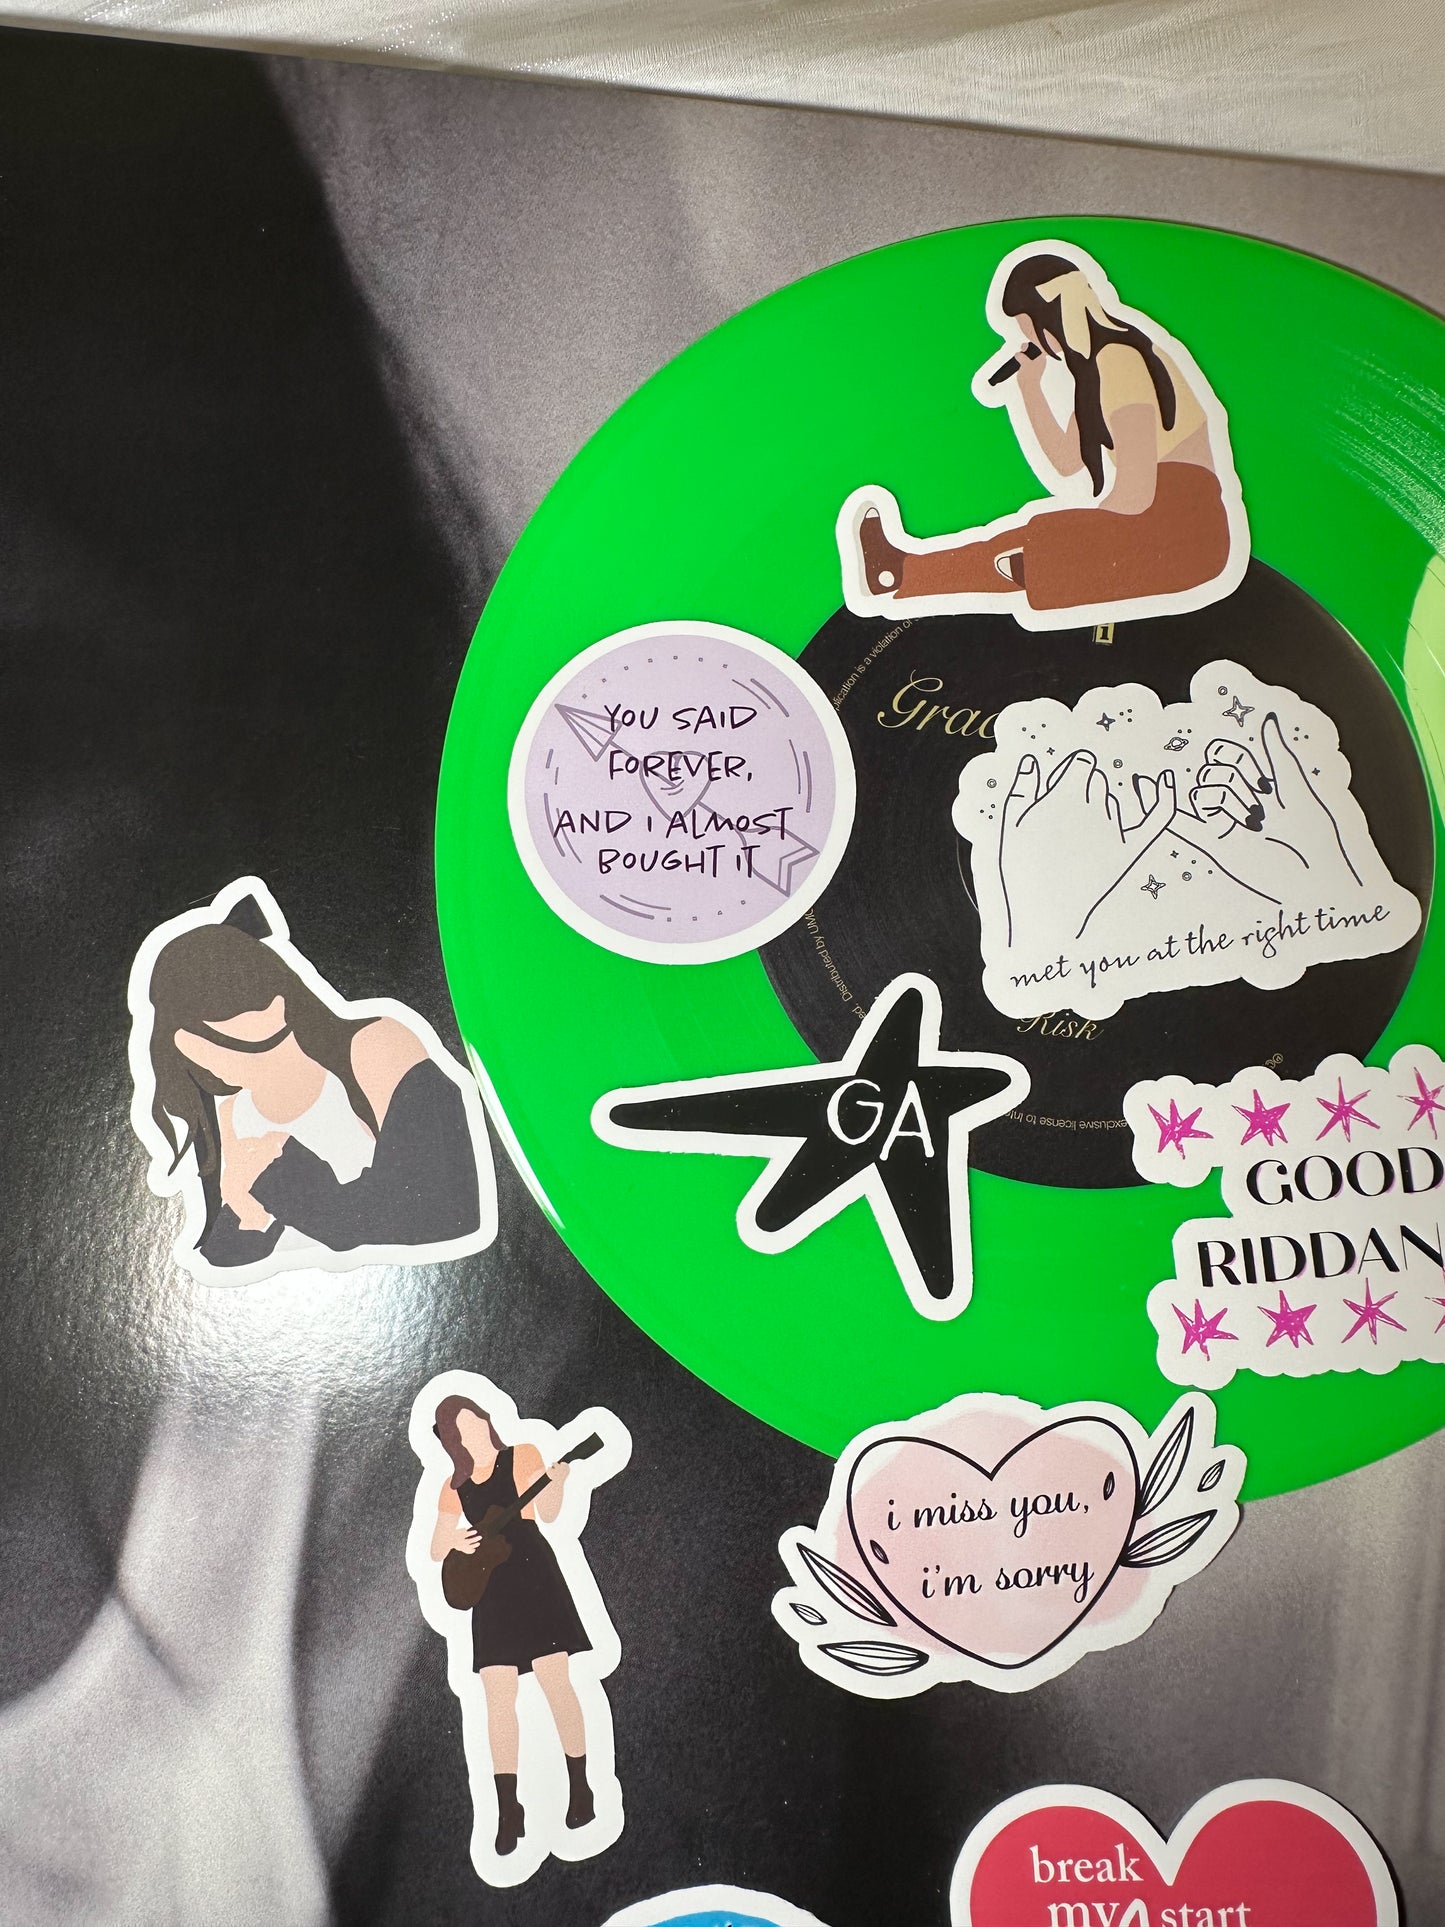 24 Gracie Abrams Stickers | The Secret of Us Risk Close to You Good Riddance